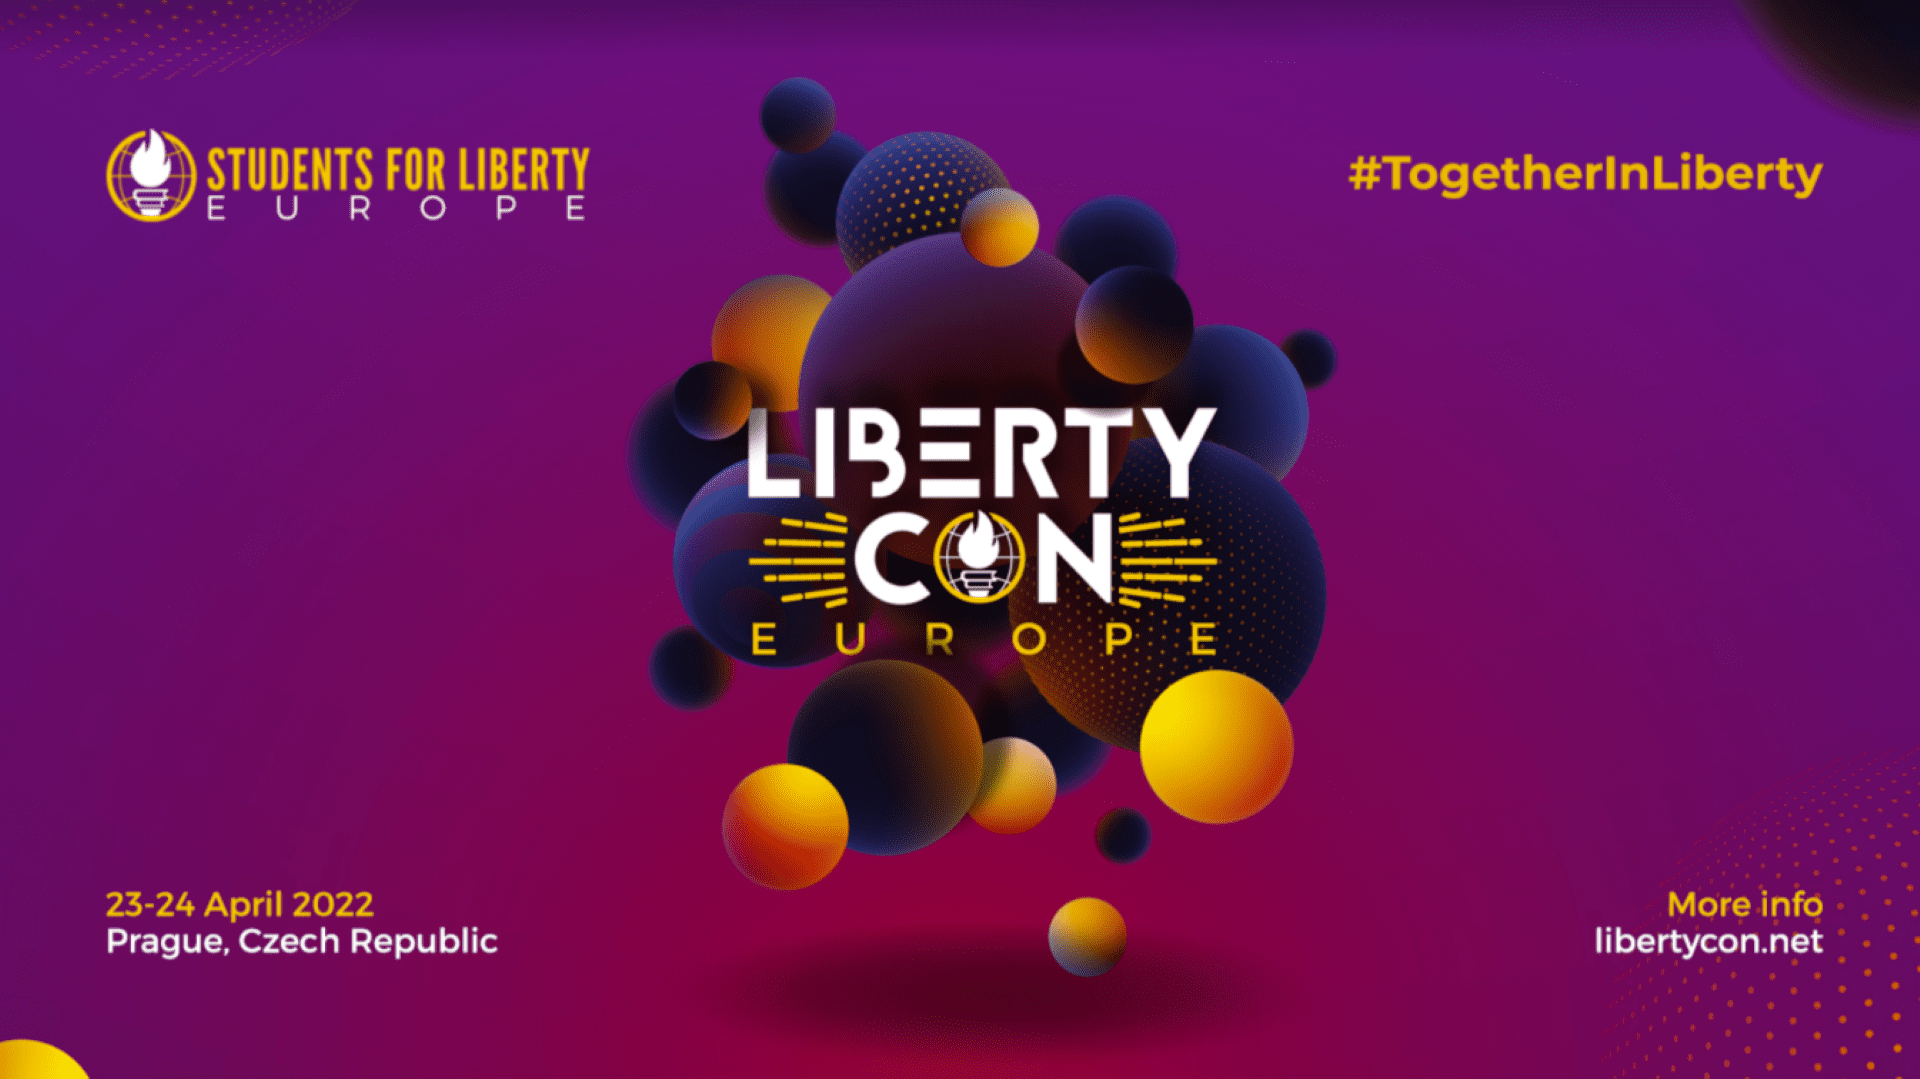 Here is just a small selection of the fantastic speakers you don’t want to miss at LibertyCon Europe on April 23-24, 2022 in Prague.